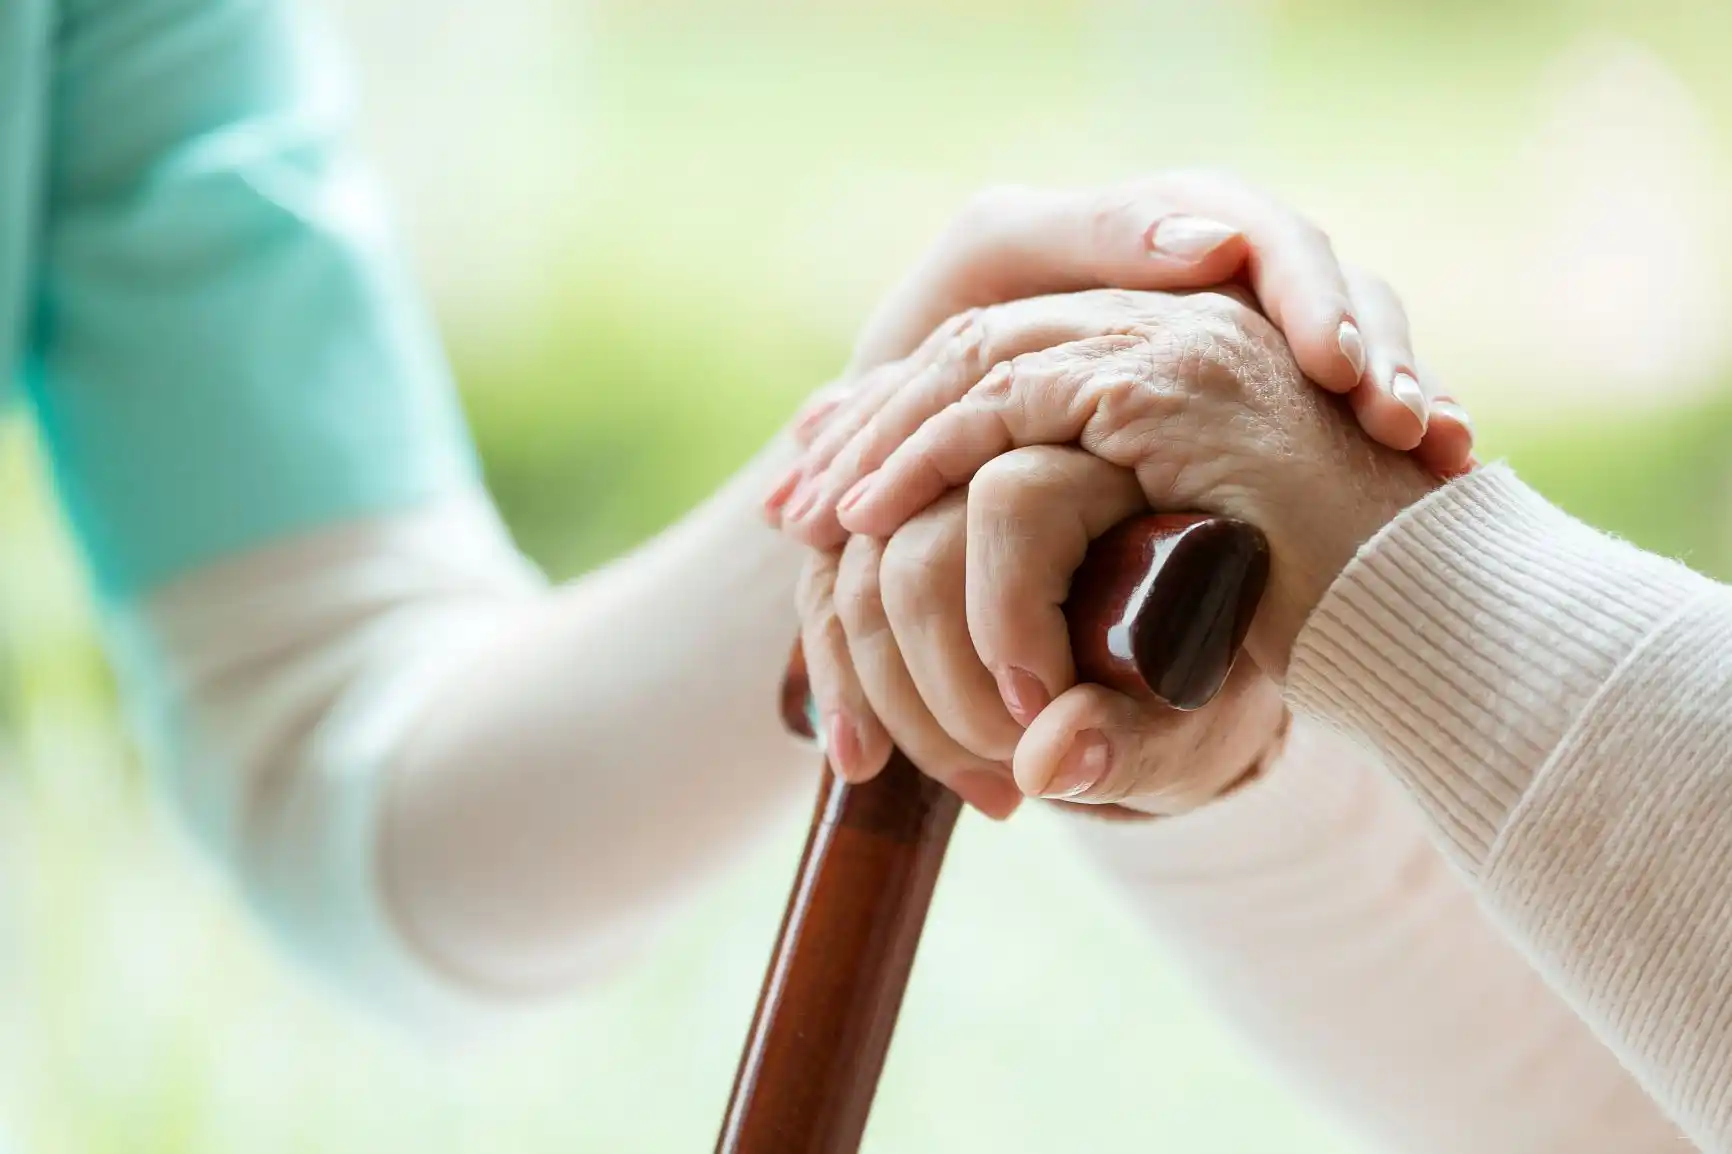 A nurse holds the hand of an elderly woman, who is holding a walking stick.